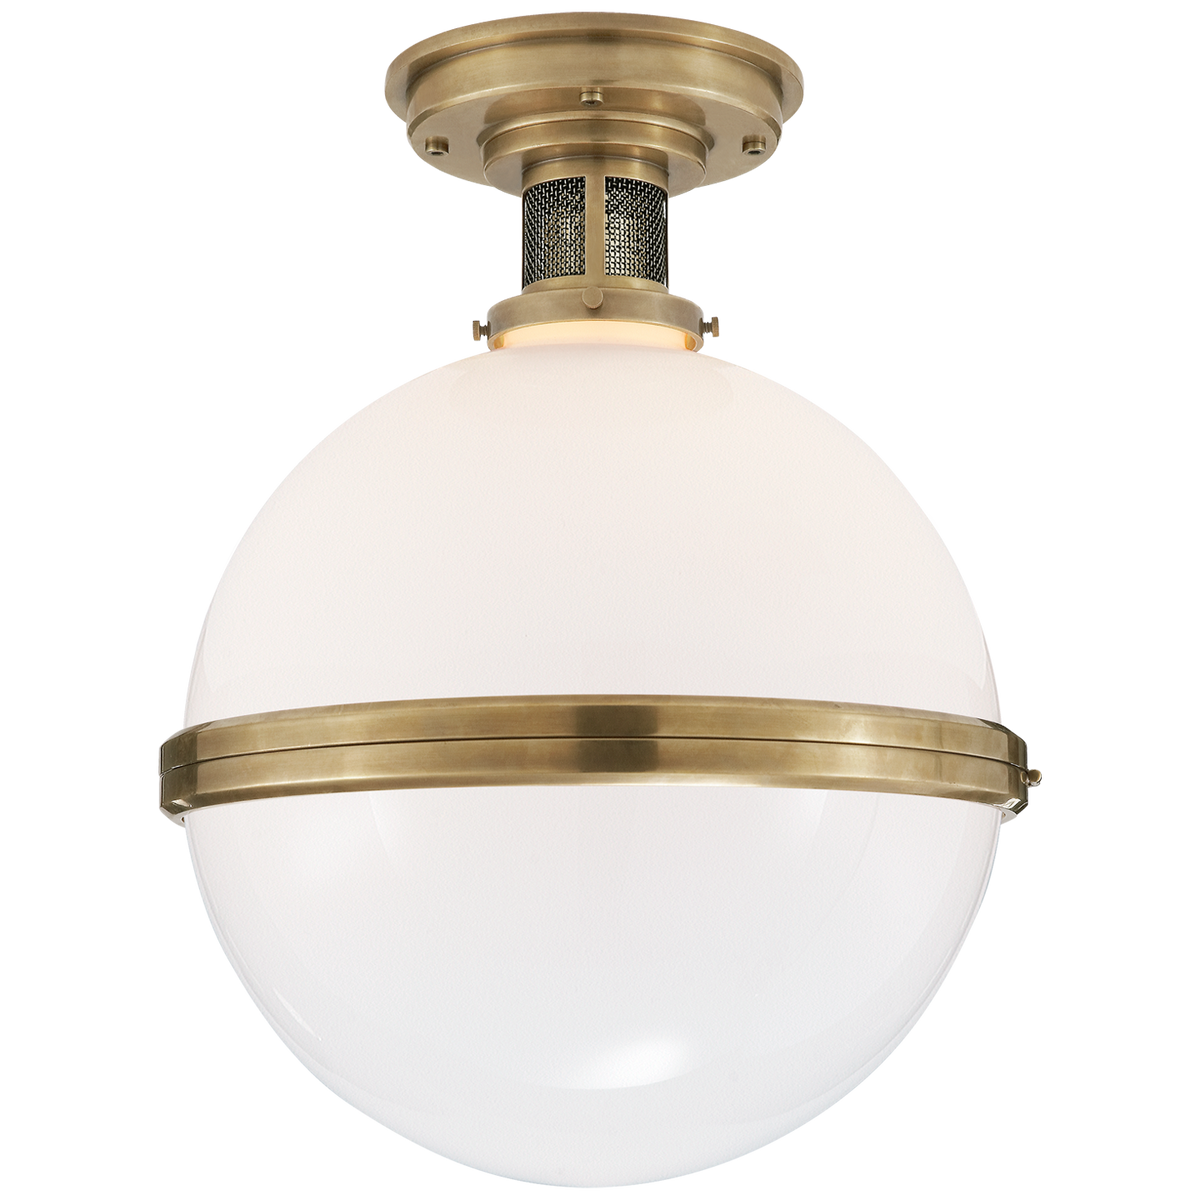 McCarren Flush Mount Large - Natural Brass with White Glass